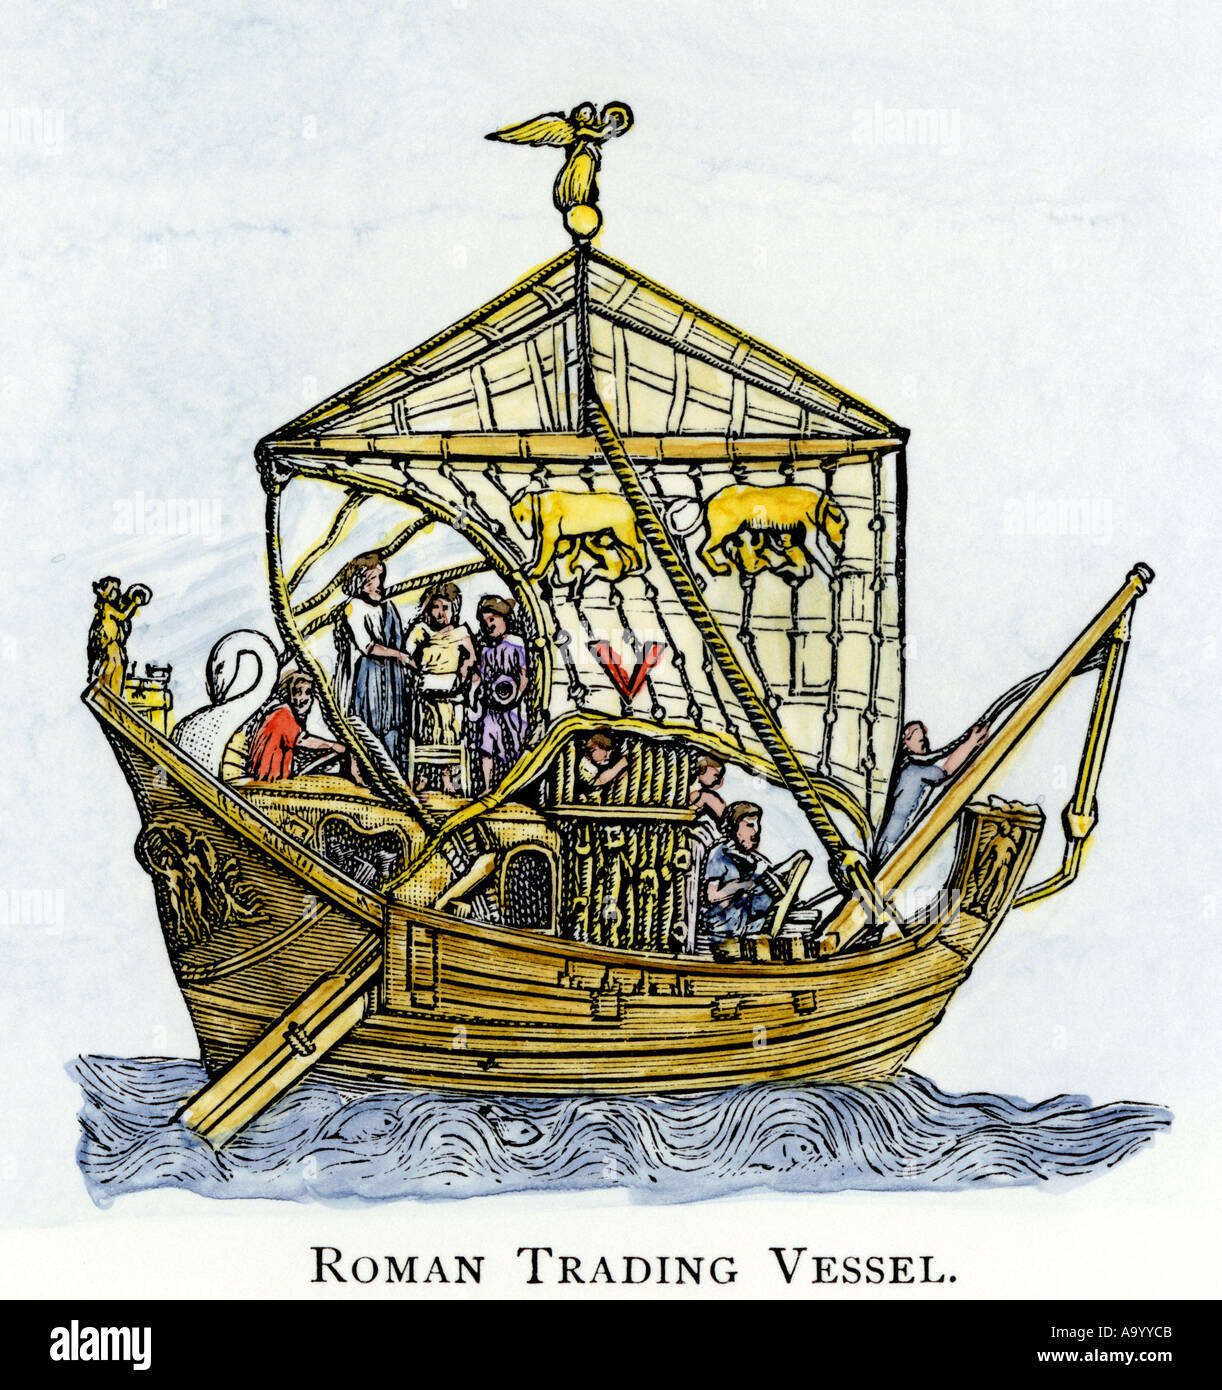 Ancient Roman trading ship with a rudder. Hand-colored woodcut Stock Photo